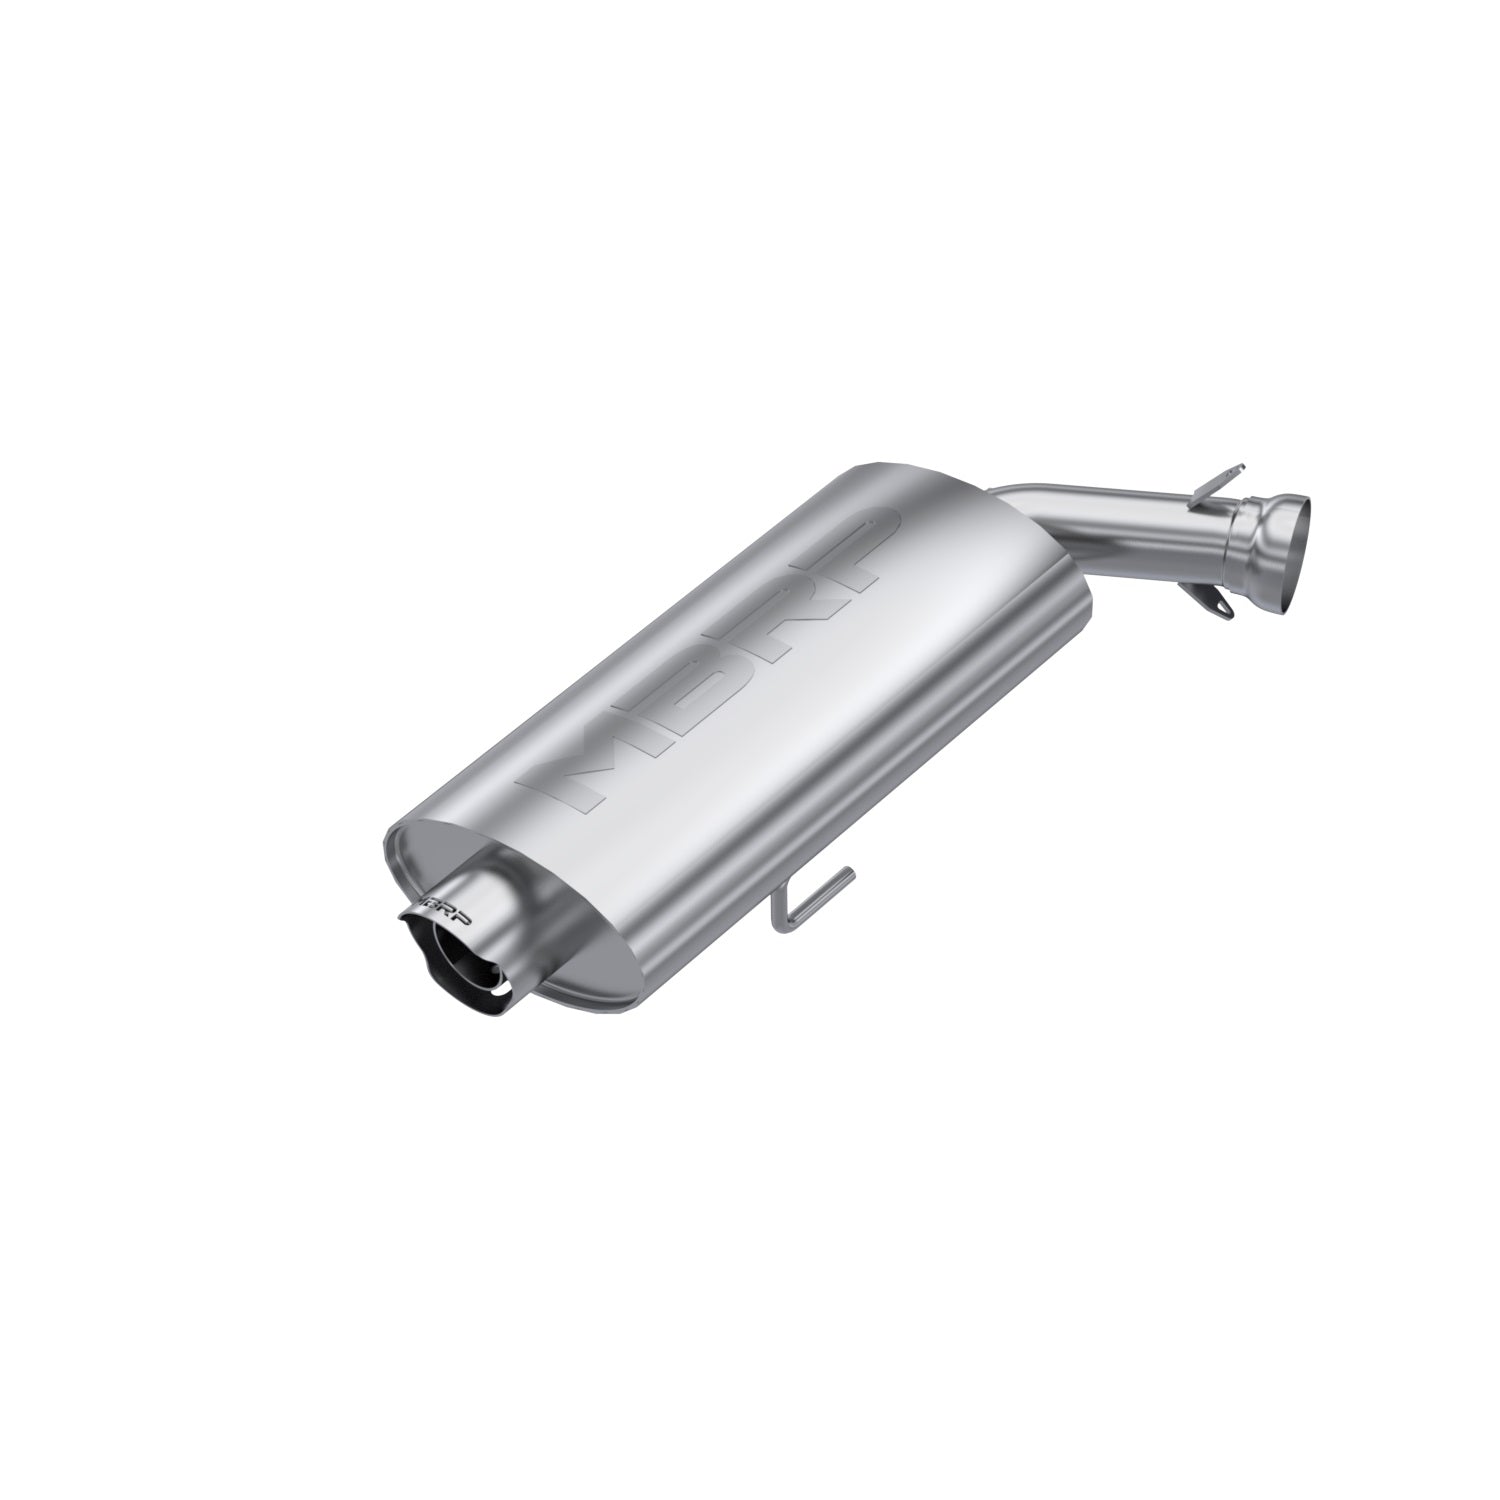 MBRP Exhaust 2020-2023 Polaris Sportsman XP 1000S and Scrambler XP 1000 Sport Series Oval Slip-On Muffler with 3 Inch Tip MBRP AT-9534SP